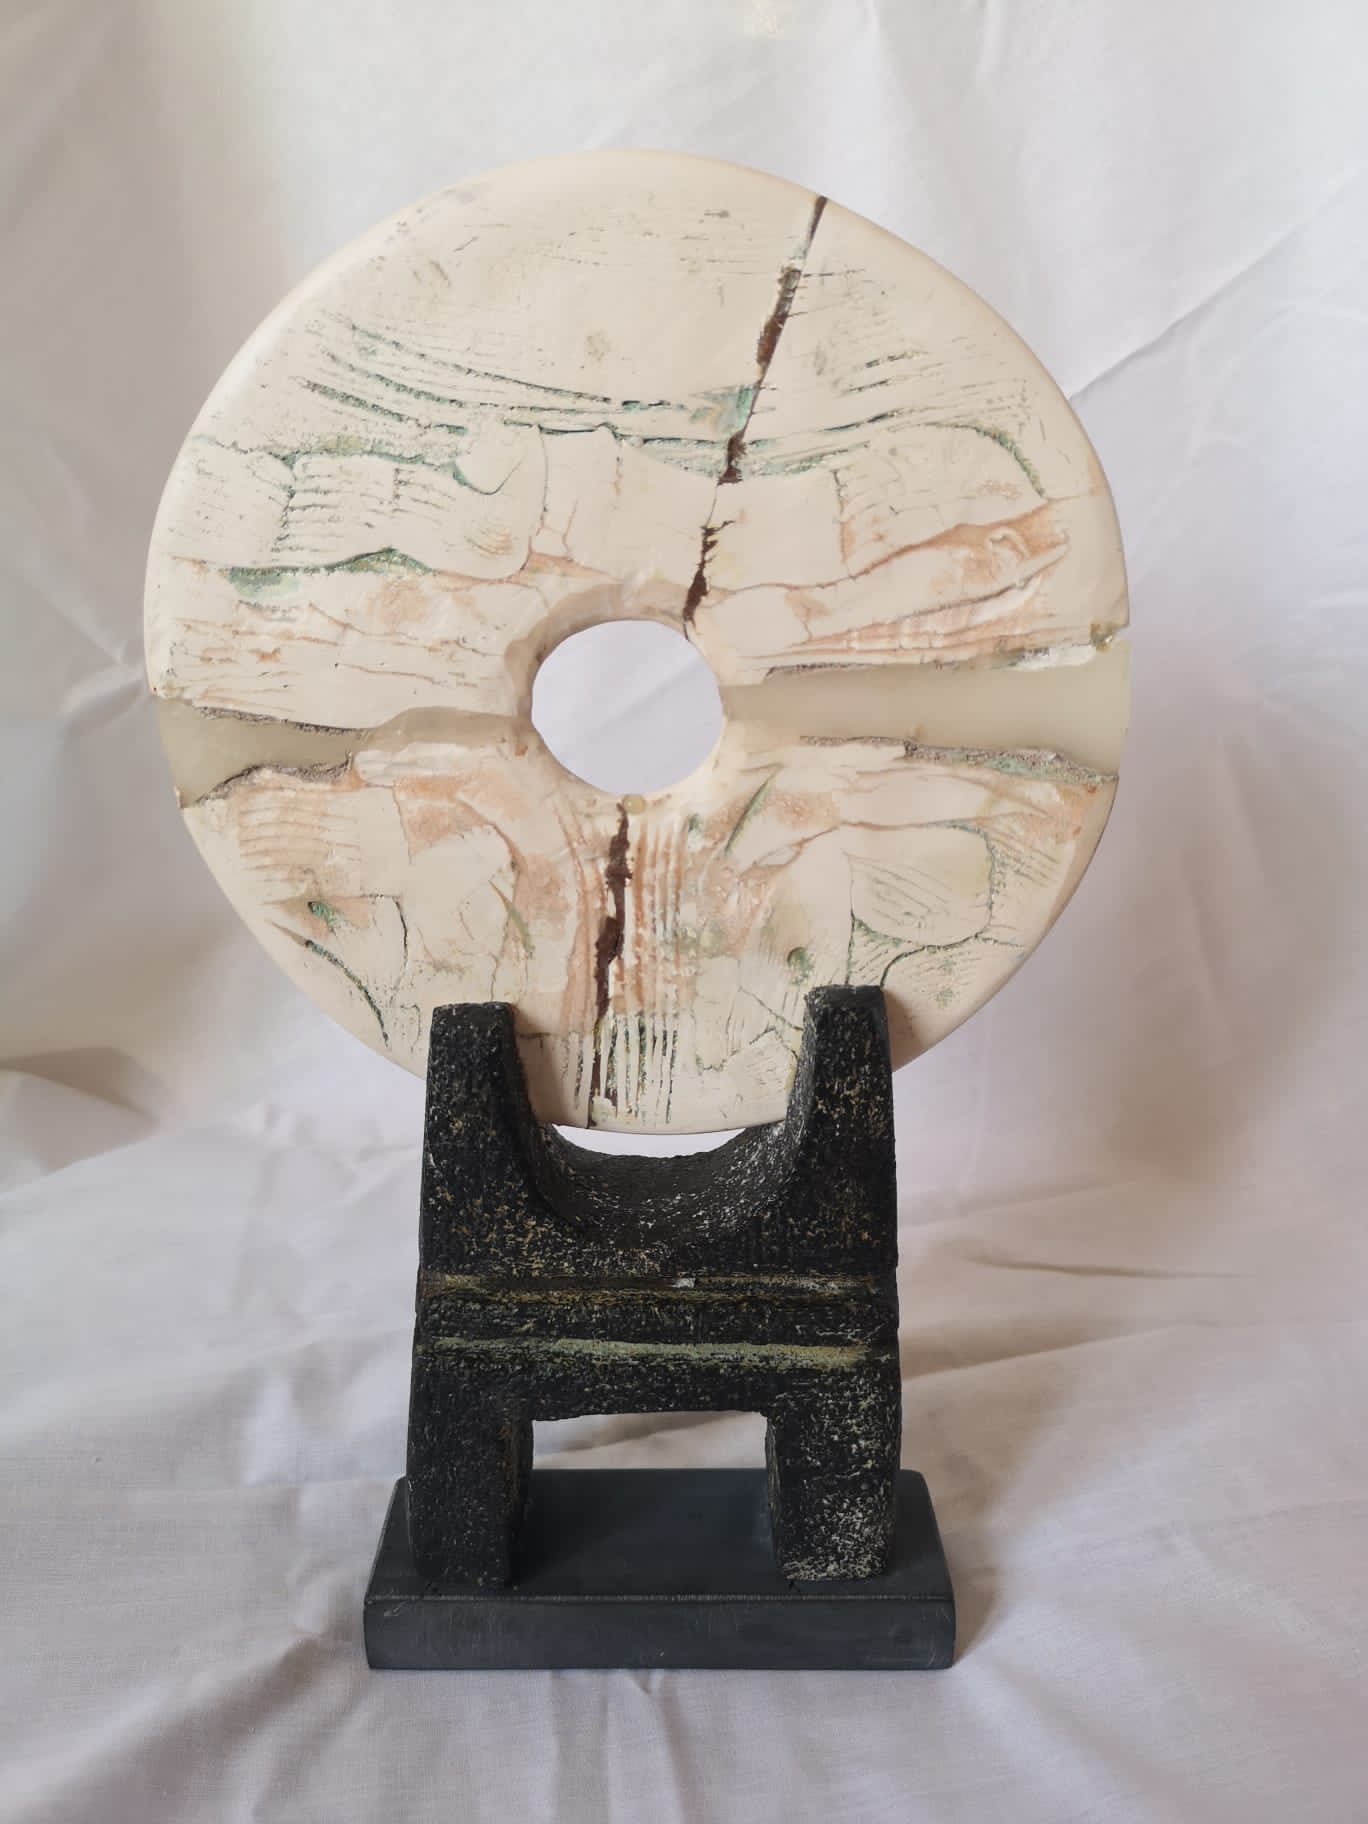 Hayes, Peter - Small Ceramic Disc (College Farm Collection)